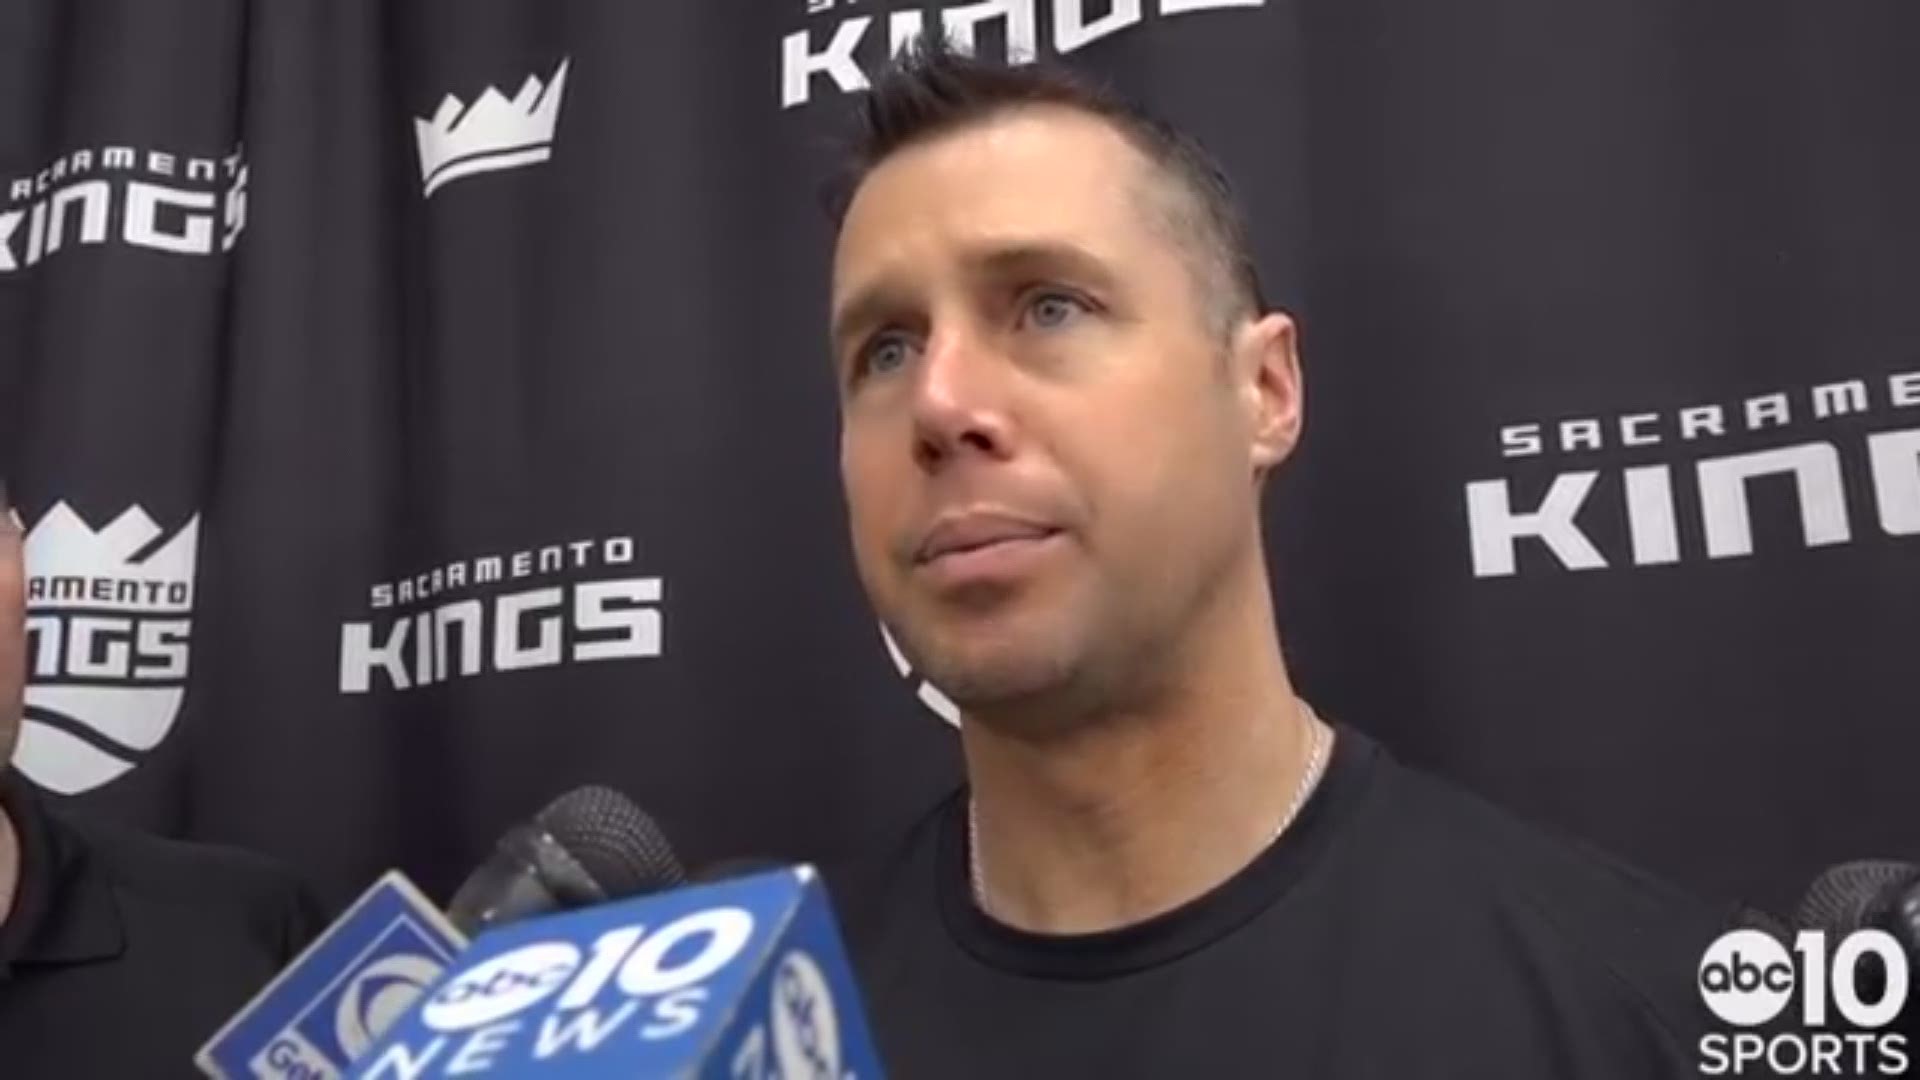 Following Wednesday's practice, Kings head coach Dave Joerger talks about his team trying to move on from the loss to the Brooklyn Nets, where Sacramento blew a 28-point lead, and the opportunity he sees for improvement.